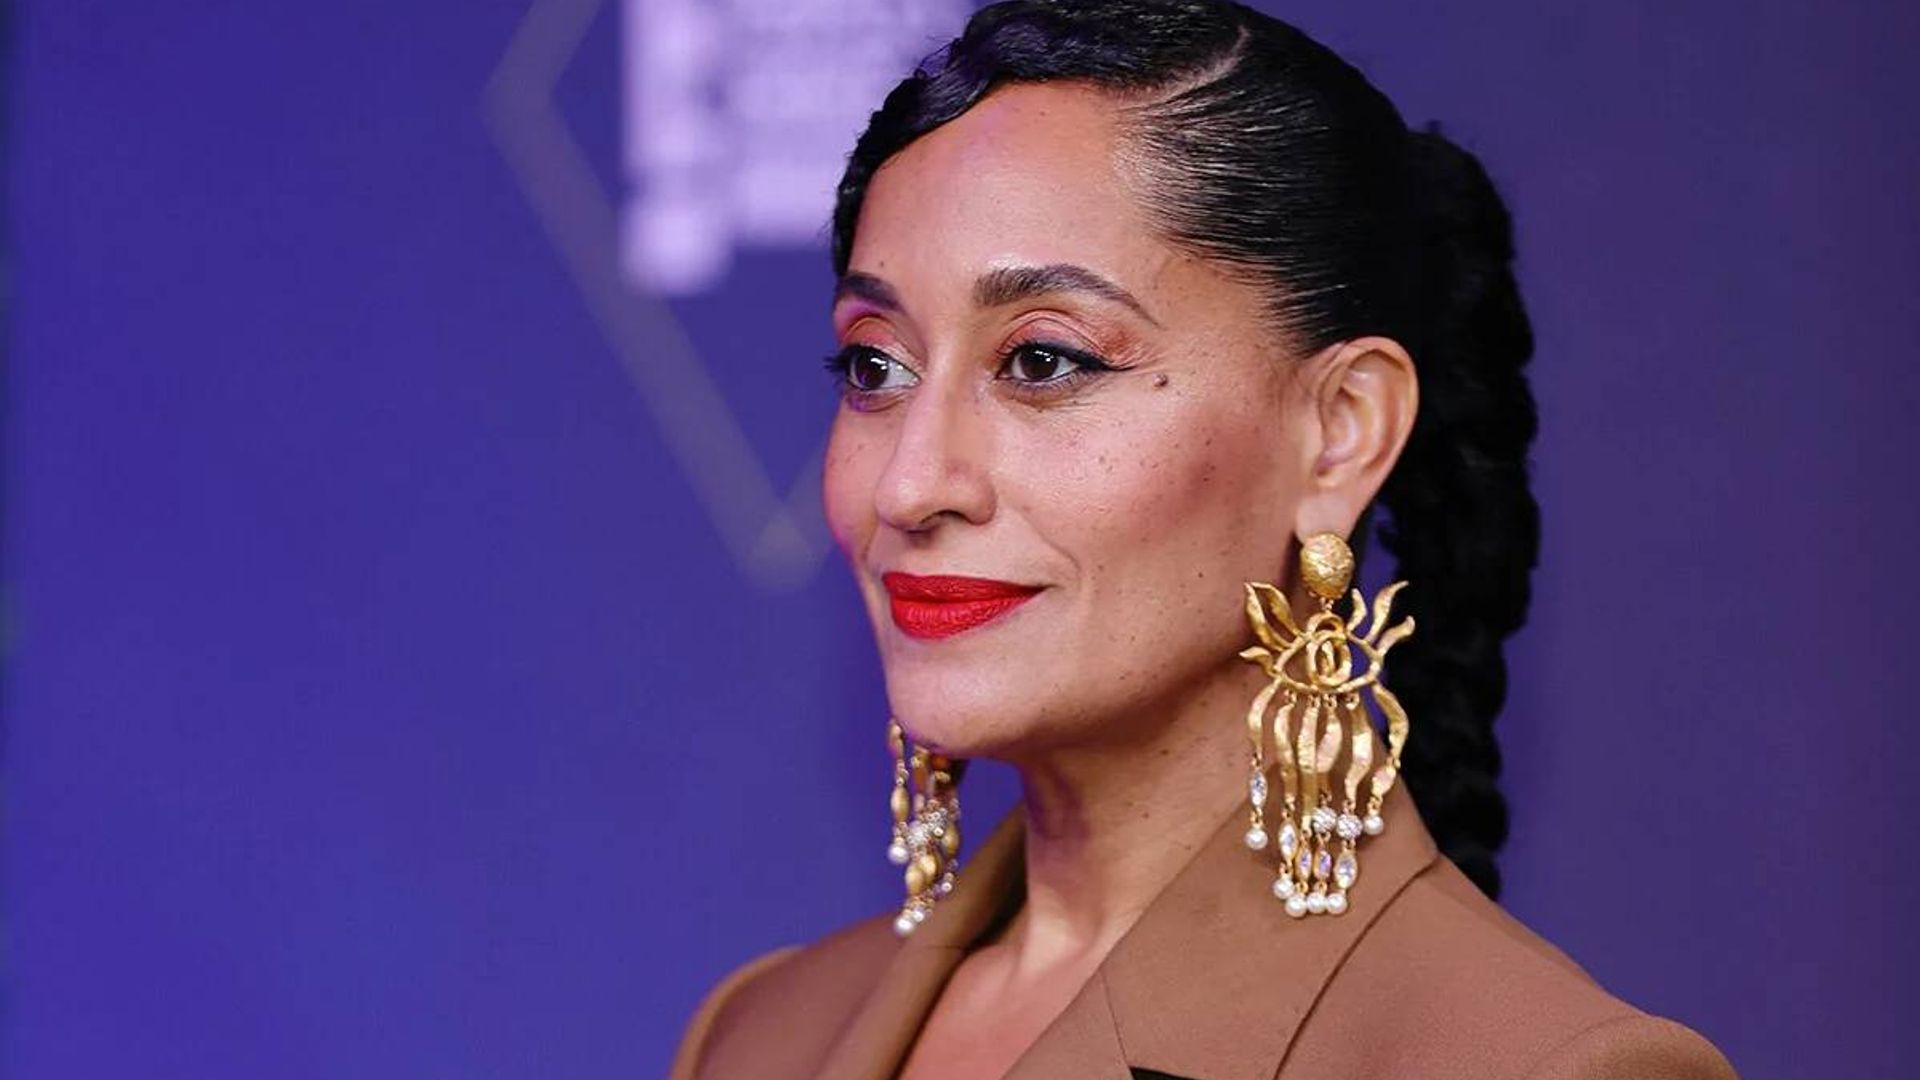 Tracee Ellis Ross makes hearts flutter in a floral bikini we want in our closets